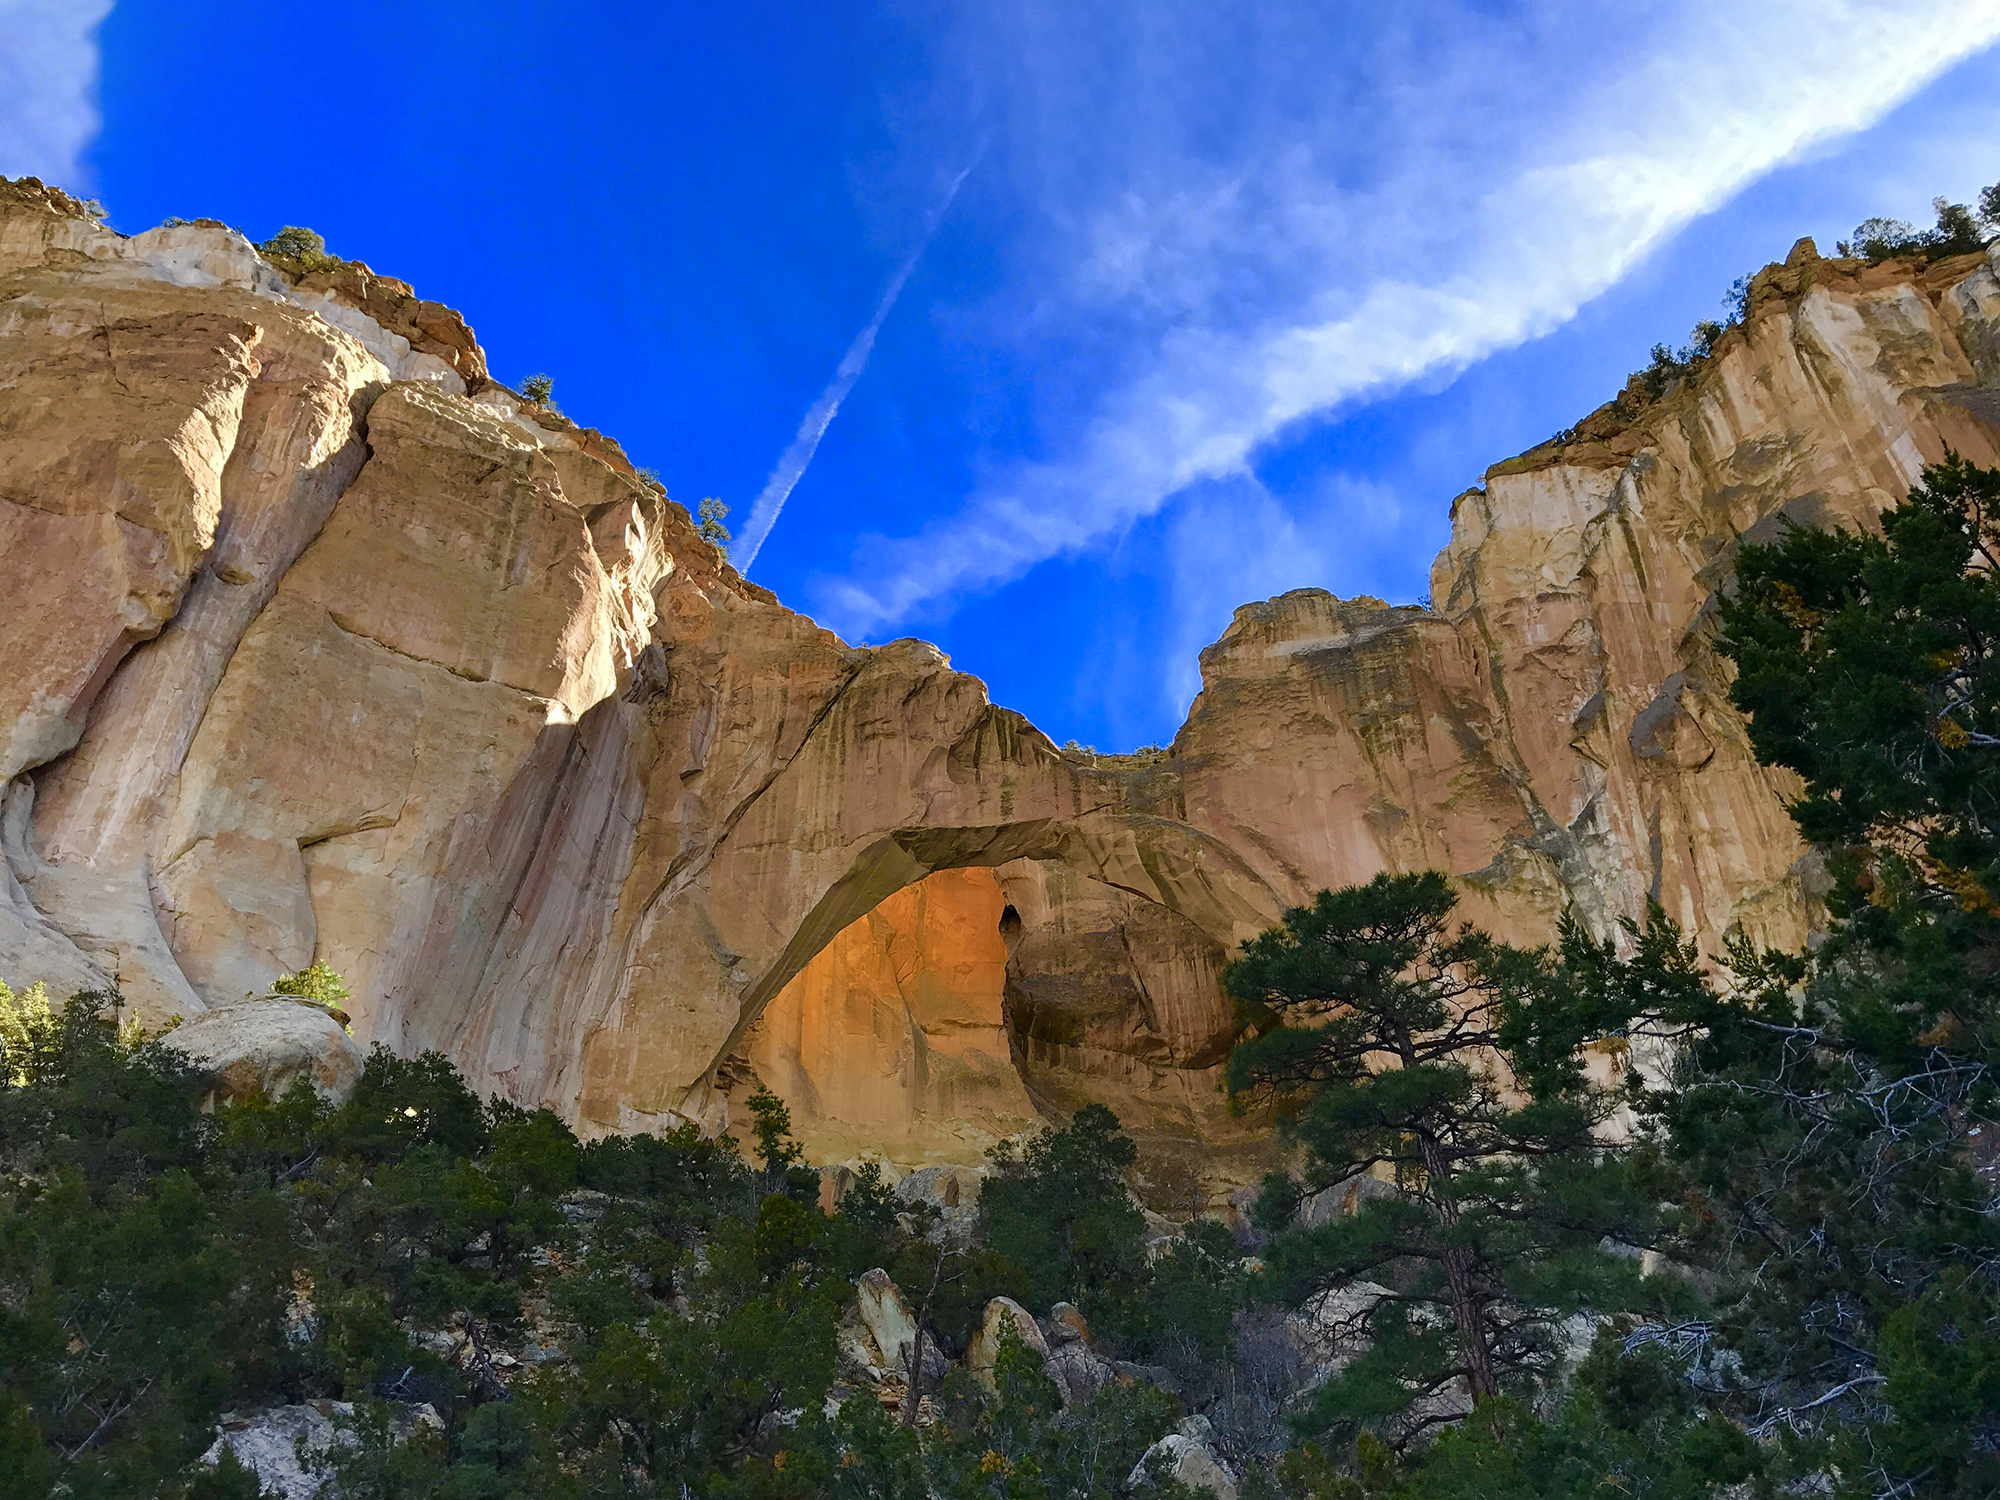 View of rock arch from below.